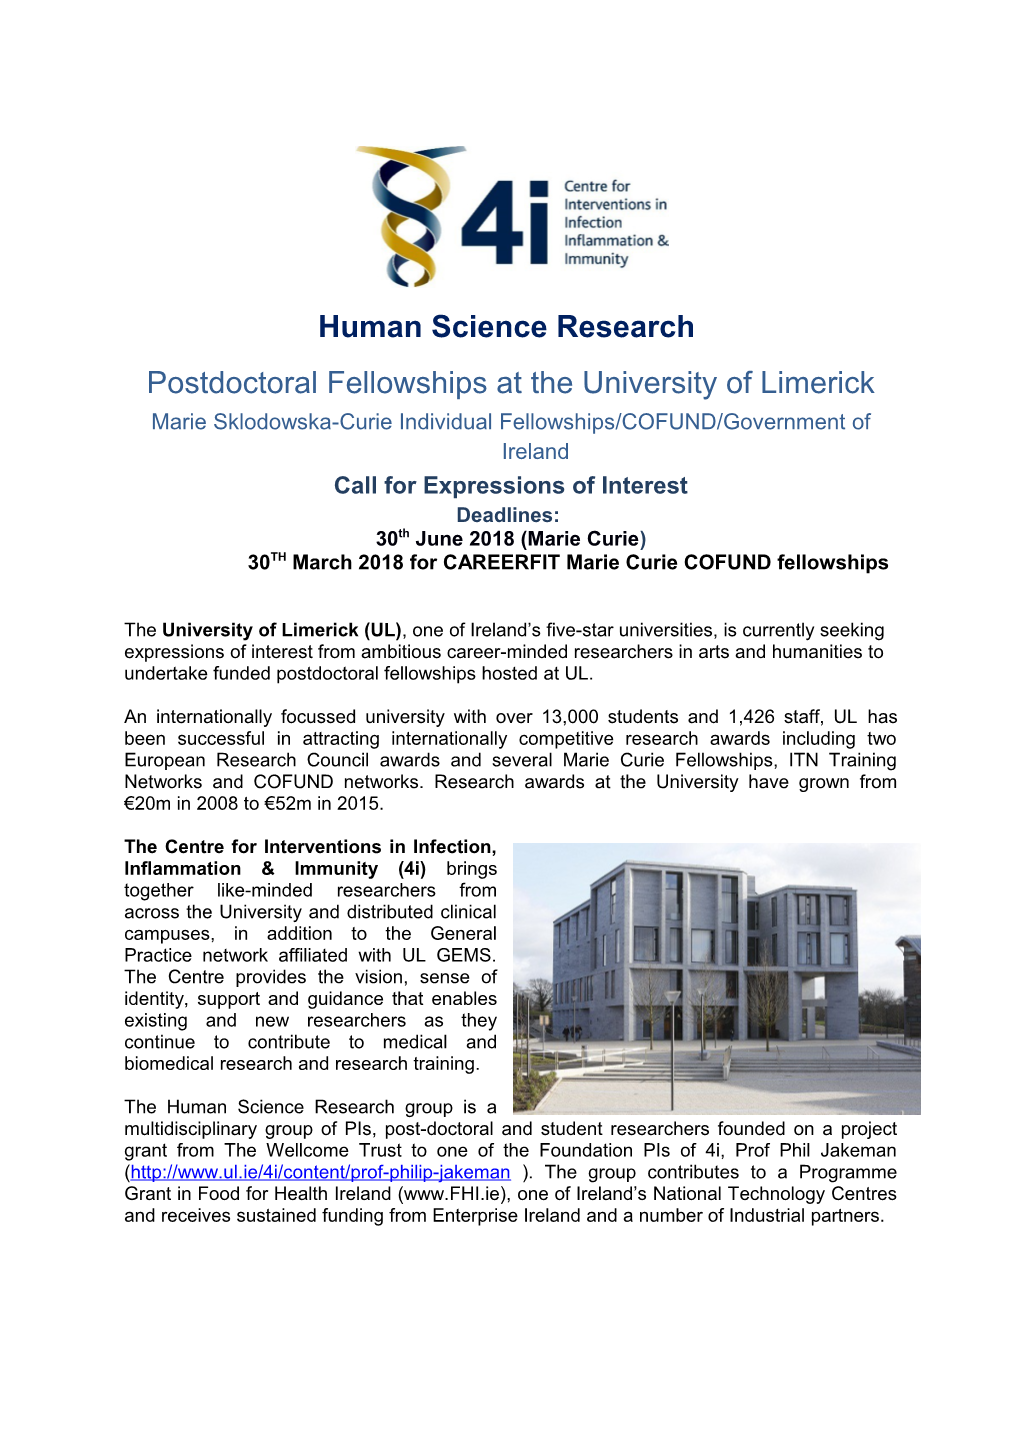 Postdoctoral Fellowships at the University of Limerick